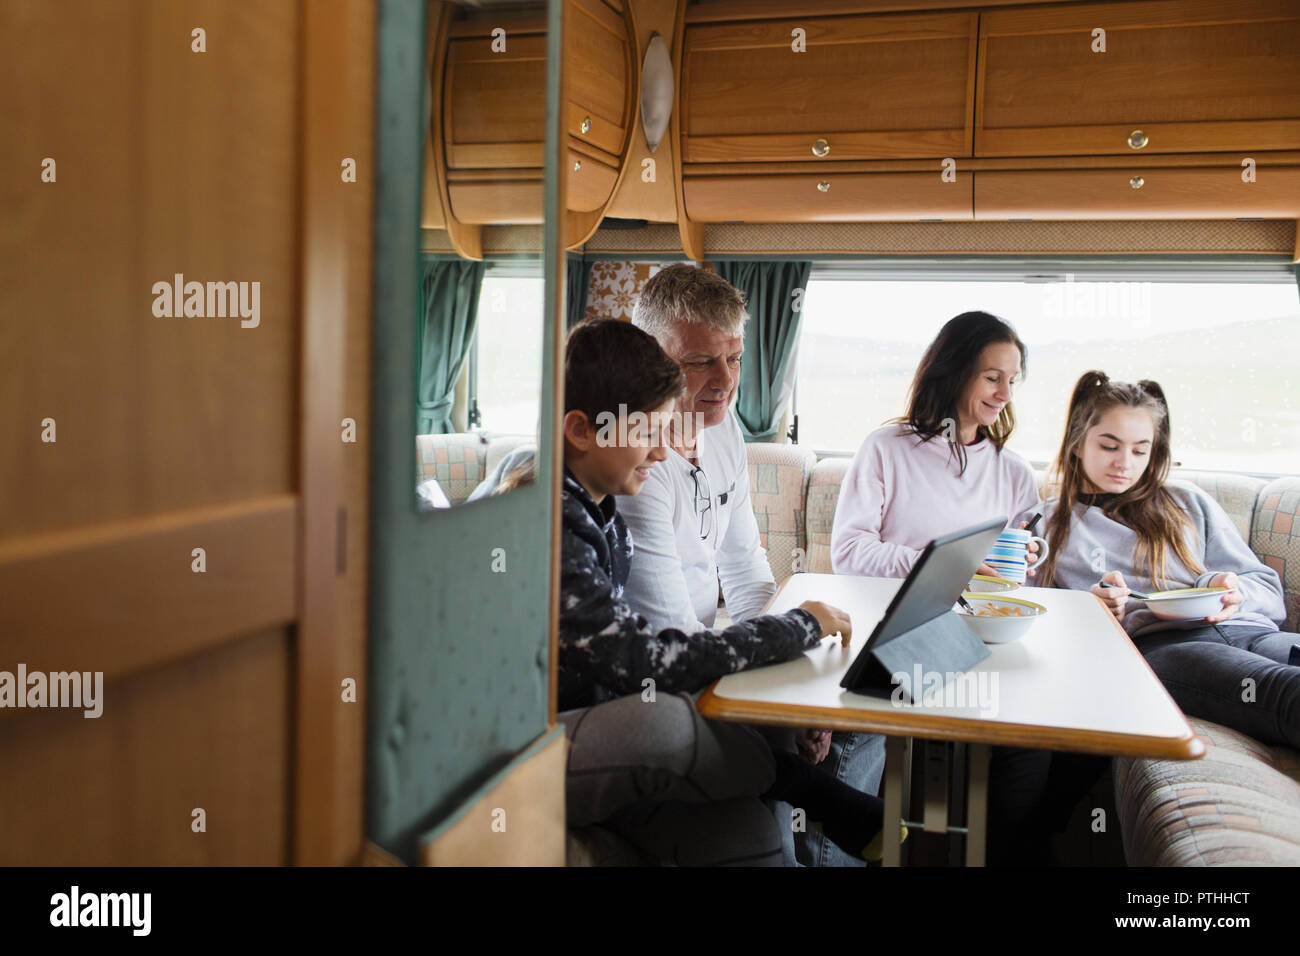 Family relaxing, eating and using digital tablet in motor home Stock Photo